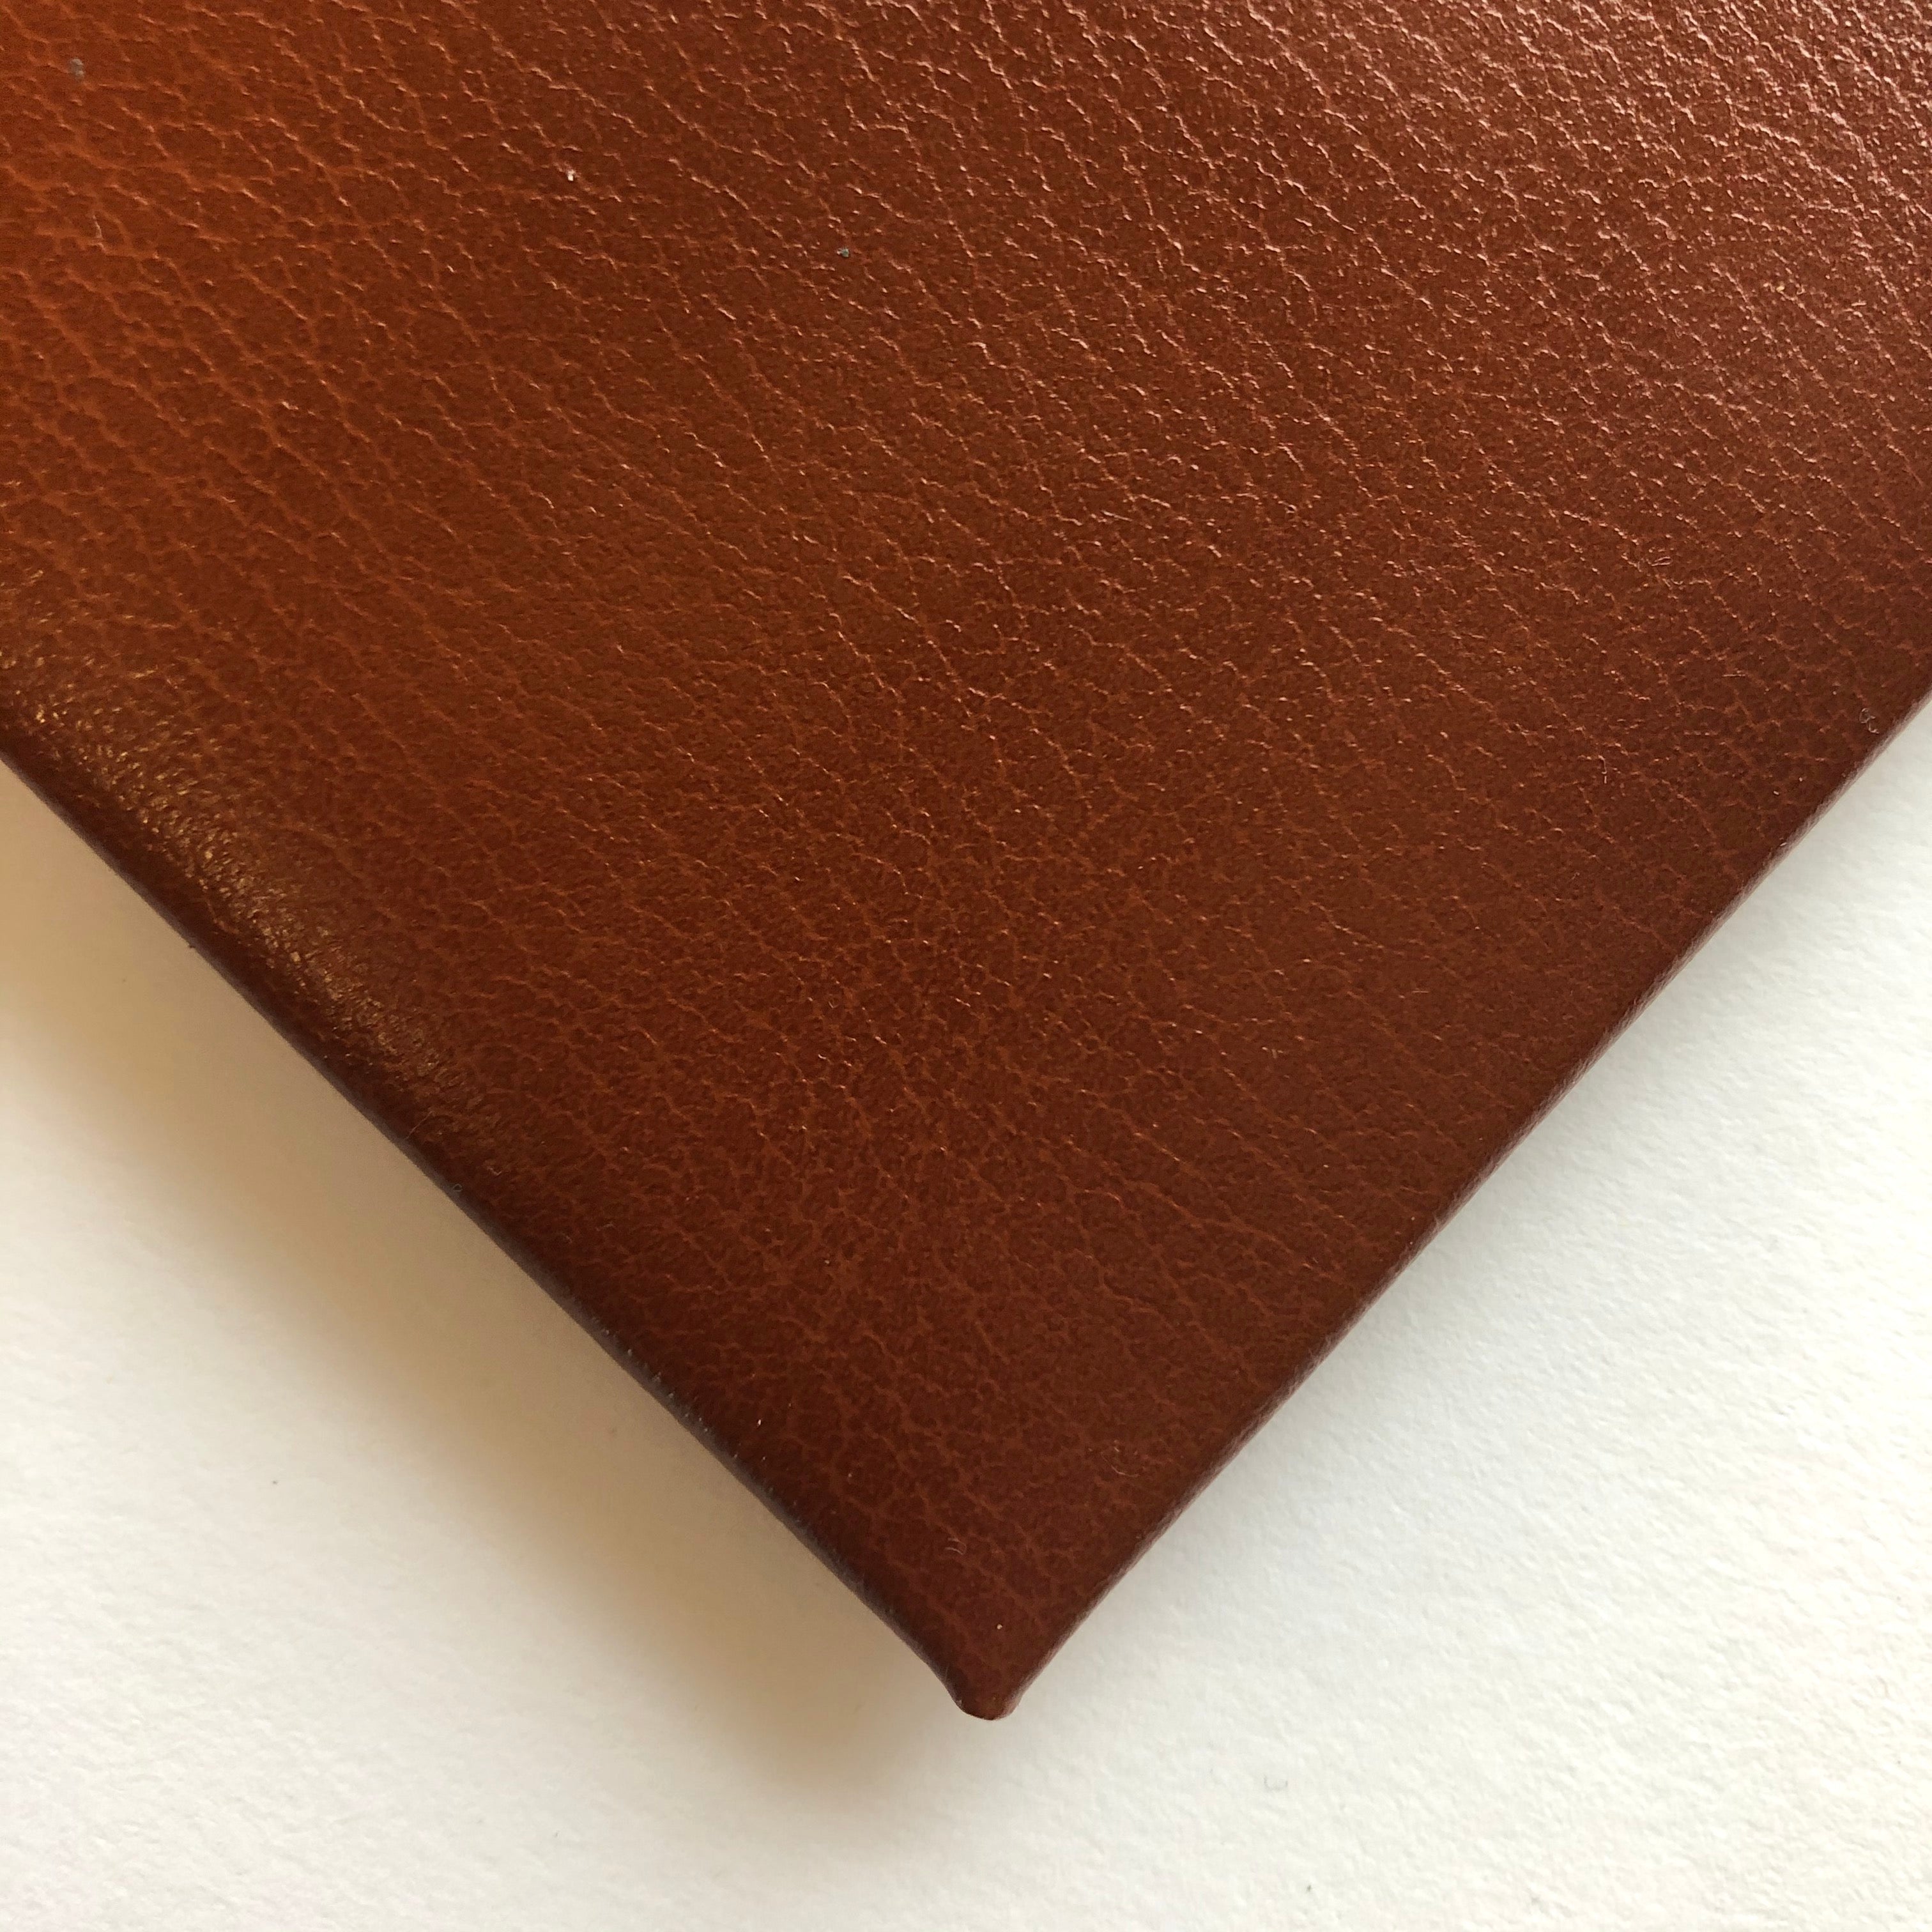 Swatch of Mid Brown Leather Visitors Book